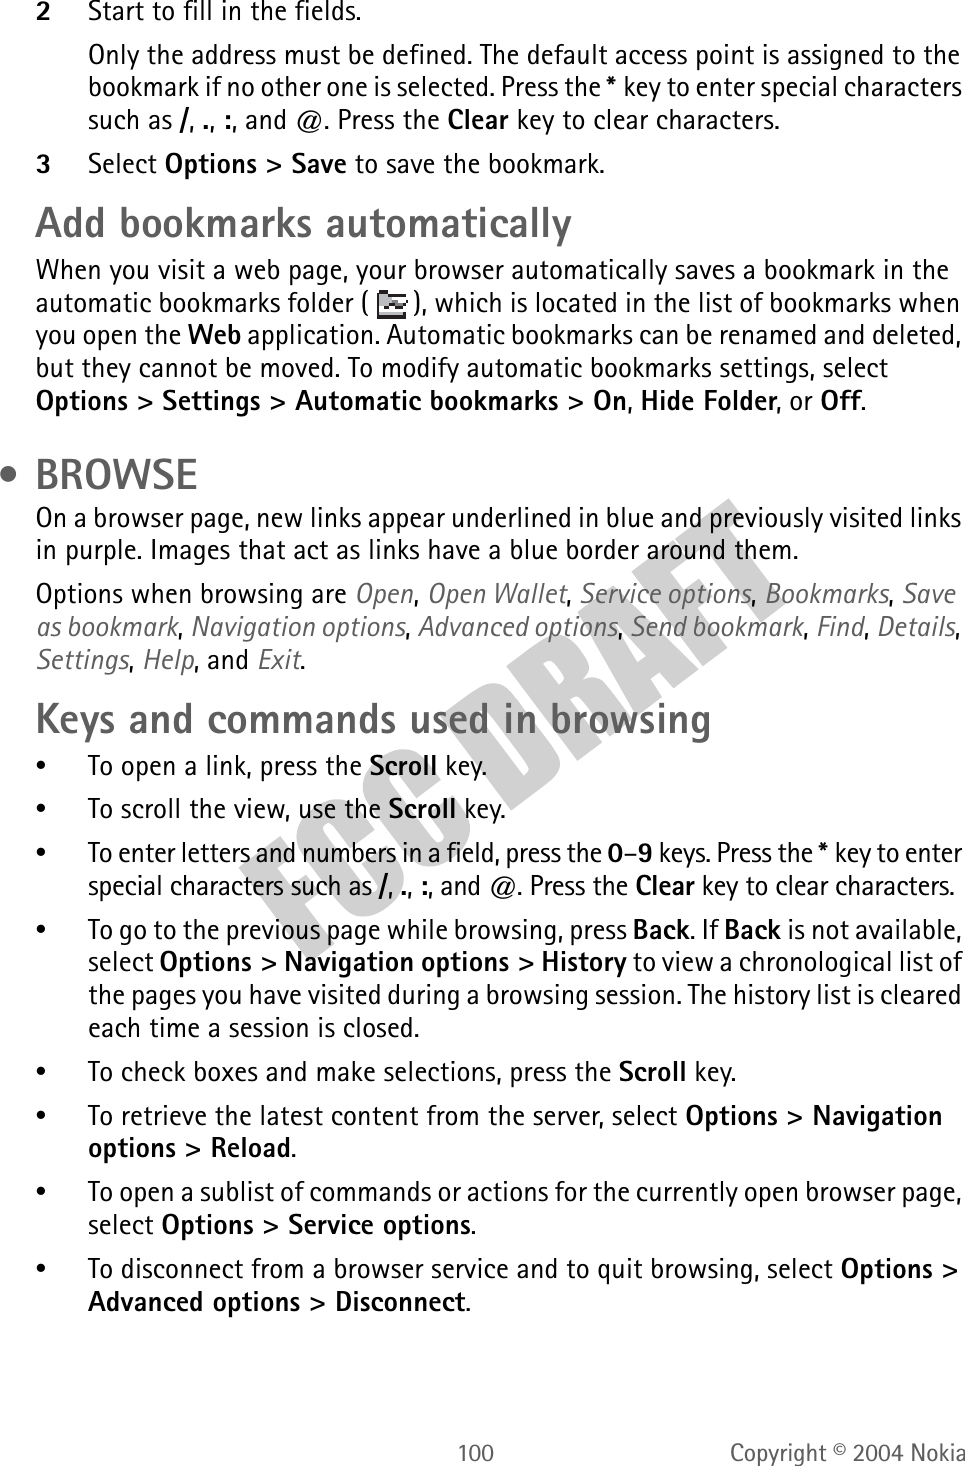 100 Copyright © 2004 Nokia2Start to fill in the fields.Only the address must be defined. The default access point is assigned to the bookmark if no other one is selected. Press the *key to enter special characters such as /, ., :, and @. Press the Clear key to clear characters.3Select Options &gt; Save to save the bookmark.Add bookmarks automaticallyWhen you visit a web page, your browser automatically saves a bookmark in the automatic bookmarks folder ( ), which is located in the list of bookmarks when you open the Web application. Automatic bookmarks can be renamed and deleted, but they cannot be moved. To modify automatic bookmarks settings, select Options &gt; Settings &gt; Automatic bookmarks &gt; On, Hide Folder, or Off. • BROWSEOn a browser page, new links appear underlined in blue and previously visited links in purple. Images that act as links have a blue border around them.Options when browsing are Open, Open Wallet, Service options, Bookmarks, Save as bookmark, Navigation options, Advanced options, Send bookmark, Find, Details, Settings, Help, and Exit.Keys and commands used in browsing•To open a link, press the Scroll key.•To scroll the view, use the Scroll key.•To enter letters and numbers in a field, press the 0–9 keys. Press the *key to enter special characters such as /, ., :, and @. Press the Clear key to clear characters.•To go to the previous page while browsing, press Back. If Back is not available, select Options &gt; Navigation options &gt; History to view a chronological list of the pages you have visited during a browsing session. The history list is cleared each time a session is closed.•To check boxes and make selections, press the Scroll key.•To retrieve the latest content from the server, select Options &gt; Navigation options &gt; Reload.•To open a sublist of commands or actions for the currently open browser page, select Options &gt; Service options.•To disconnect from a browser service and to quit browsing, select Options &gt; Advanced options &gt; Disconnect.